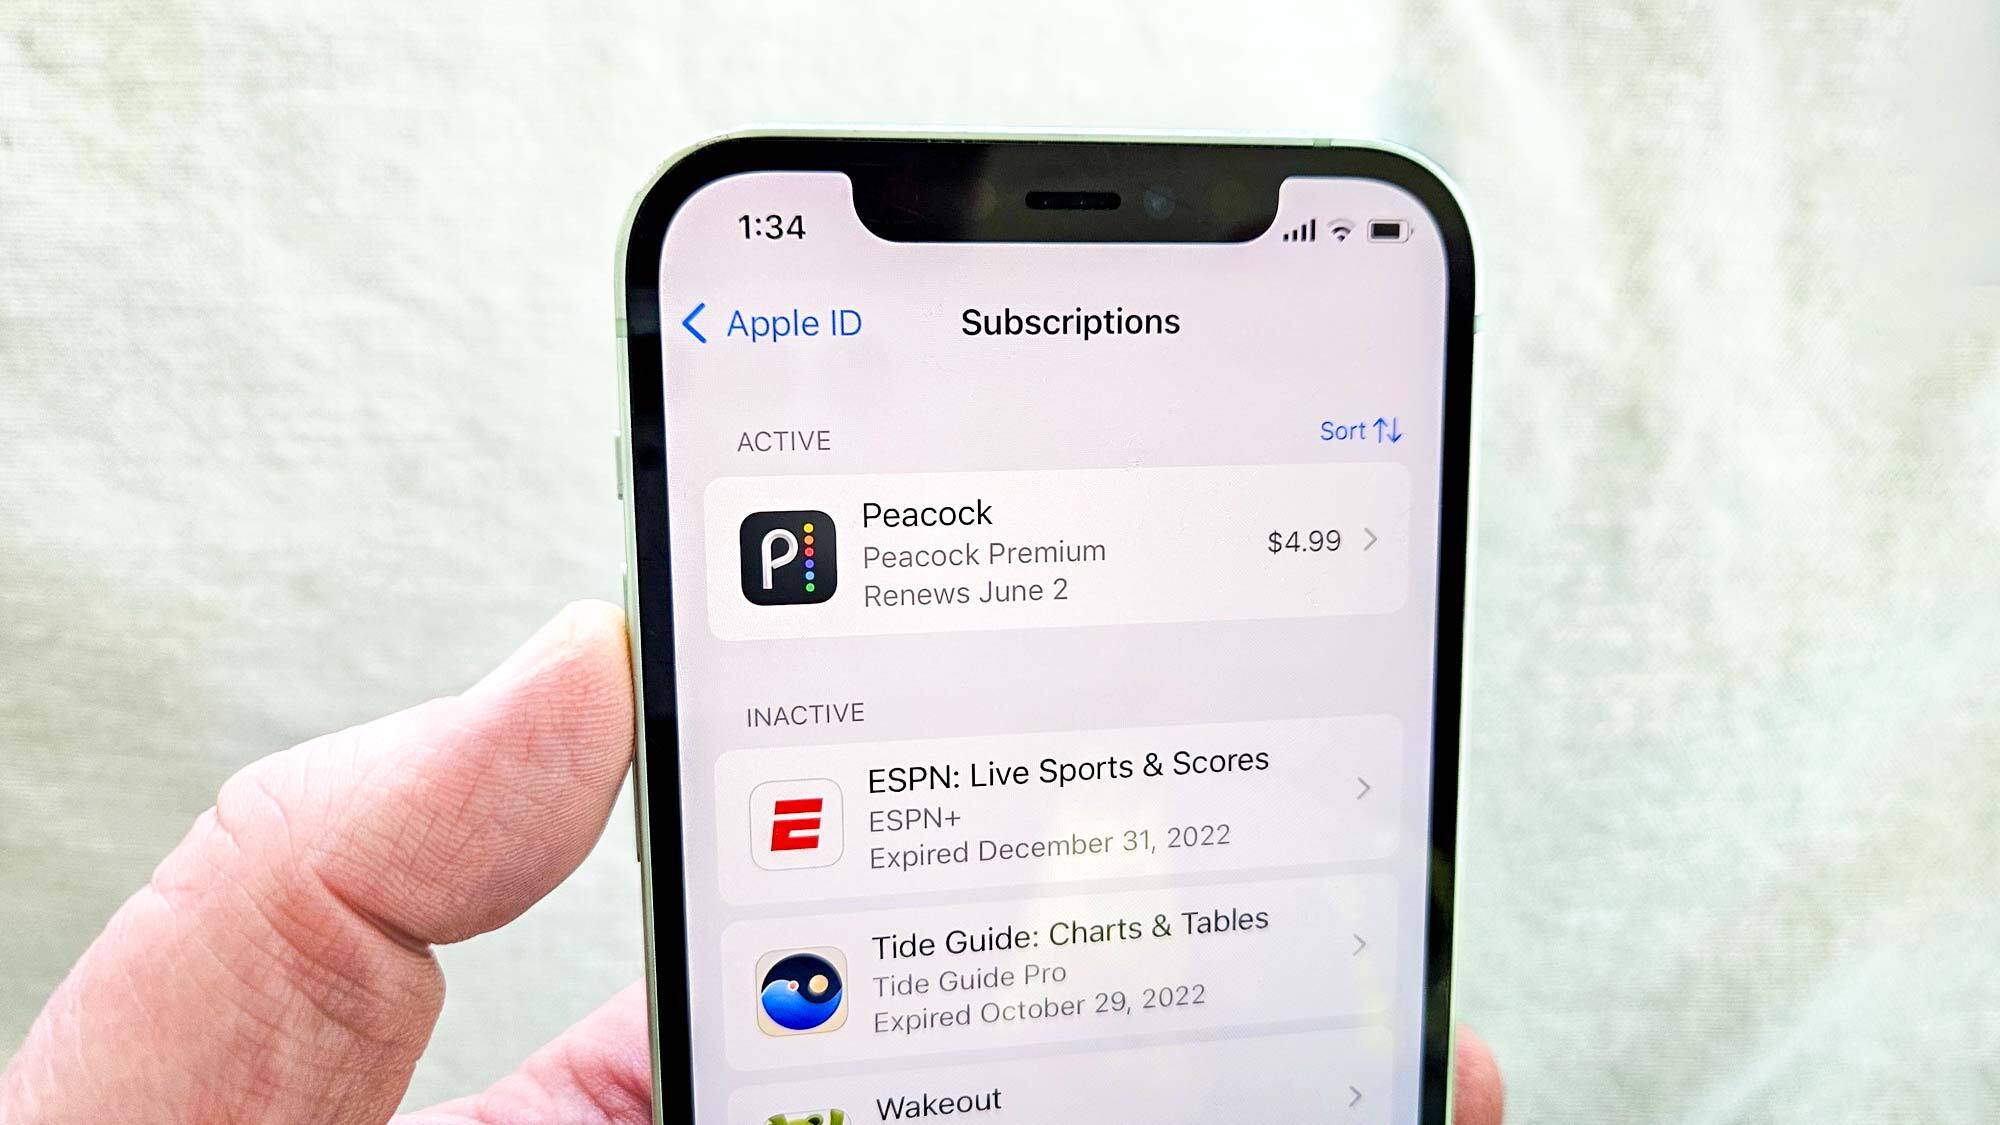 Subscription management in the current version of iOS 16